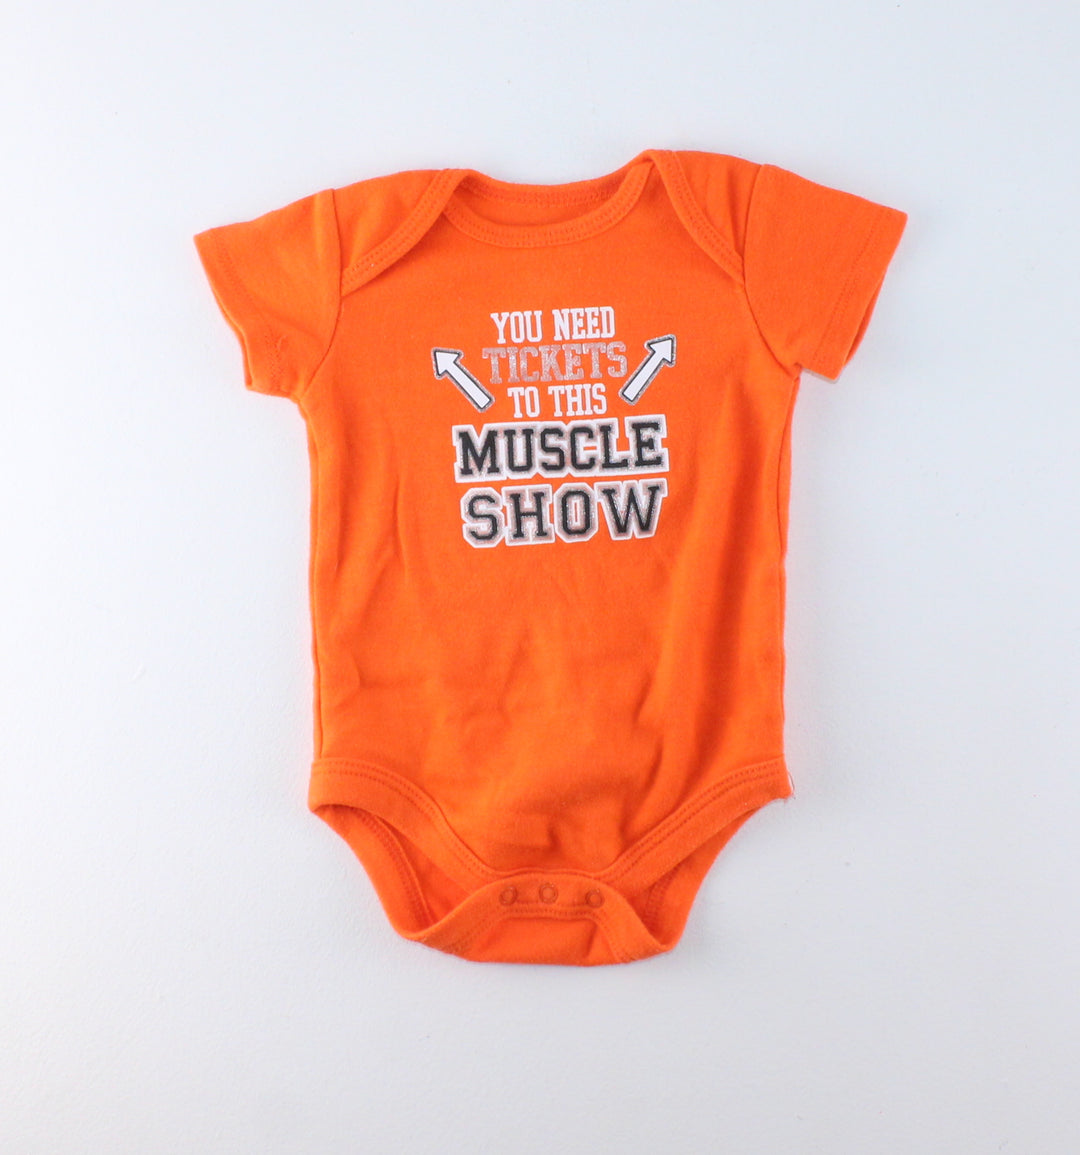 TICKETS TO THE MUSCLE SHOW ONESIE 0-3M VGUC